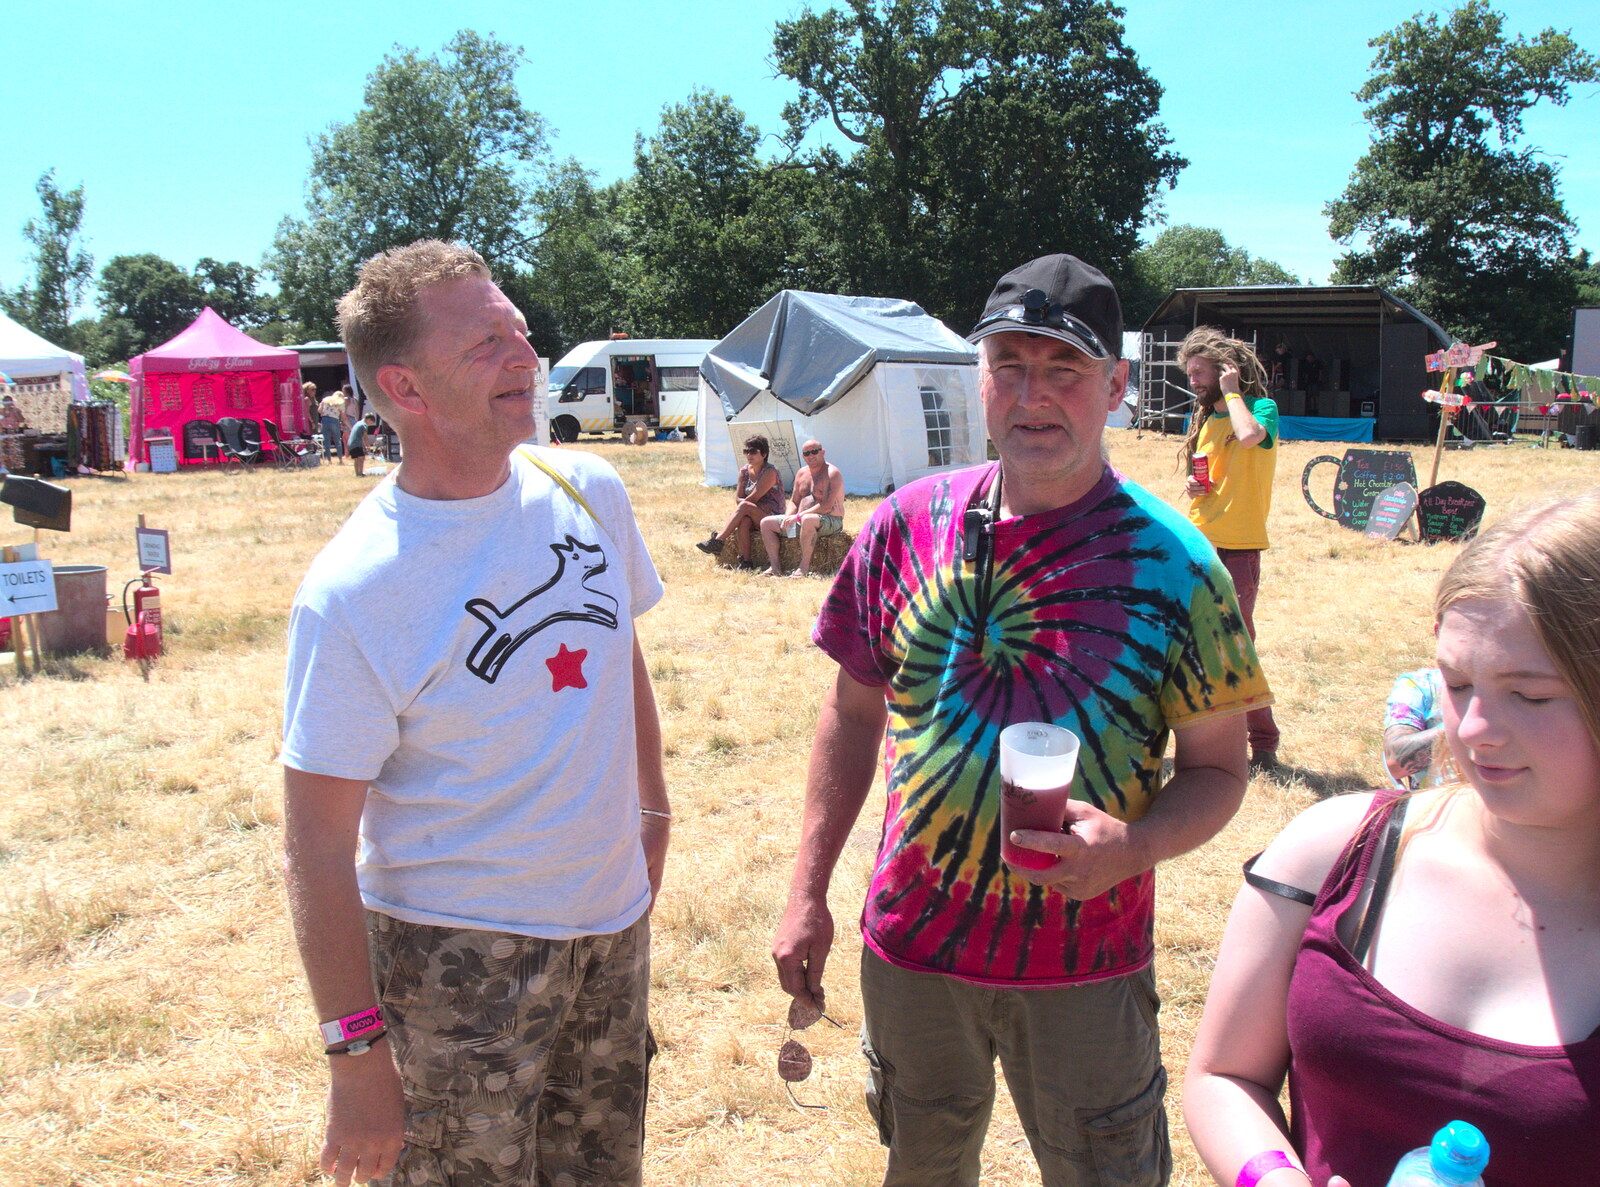 Gaz and his mate from WoW Festival, Burston, Norfolk - 29th June - 1st July 2018